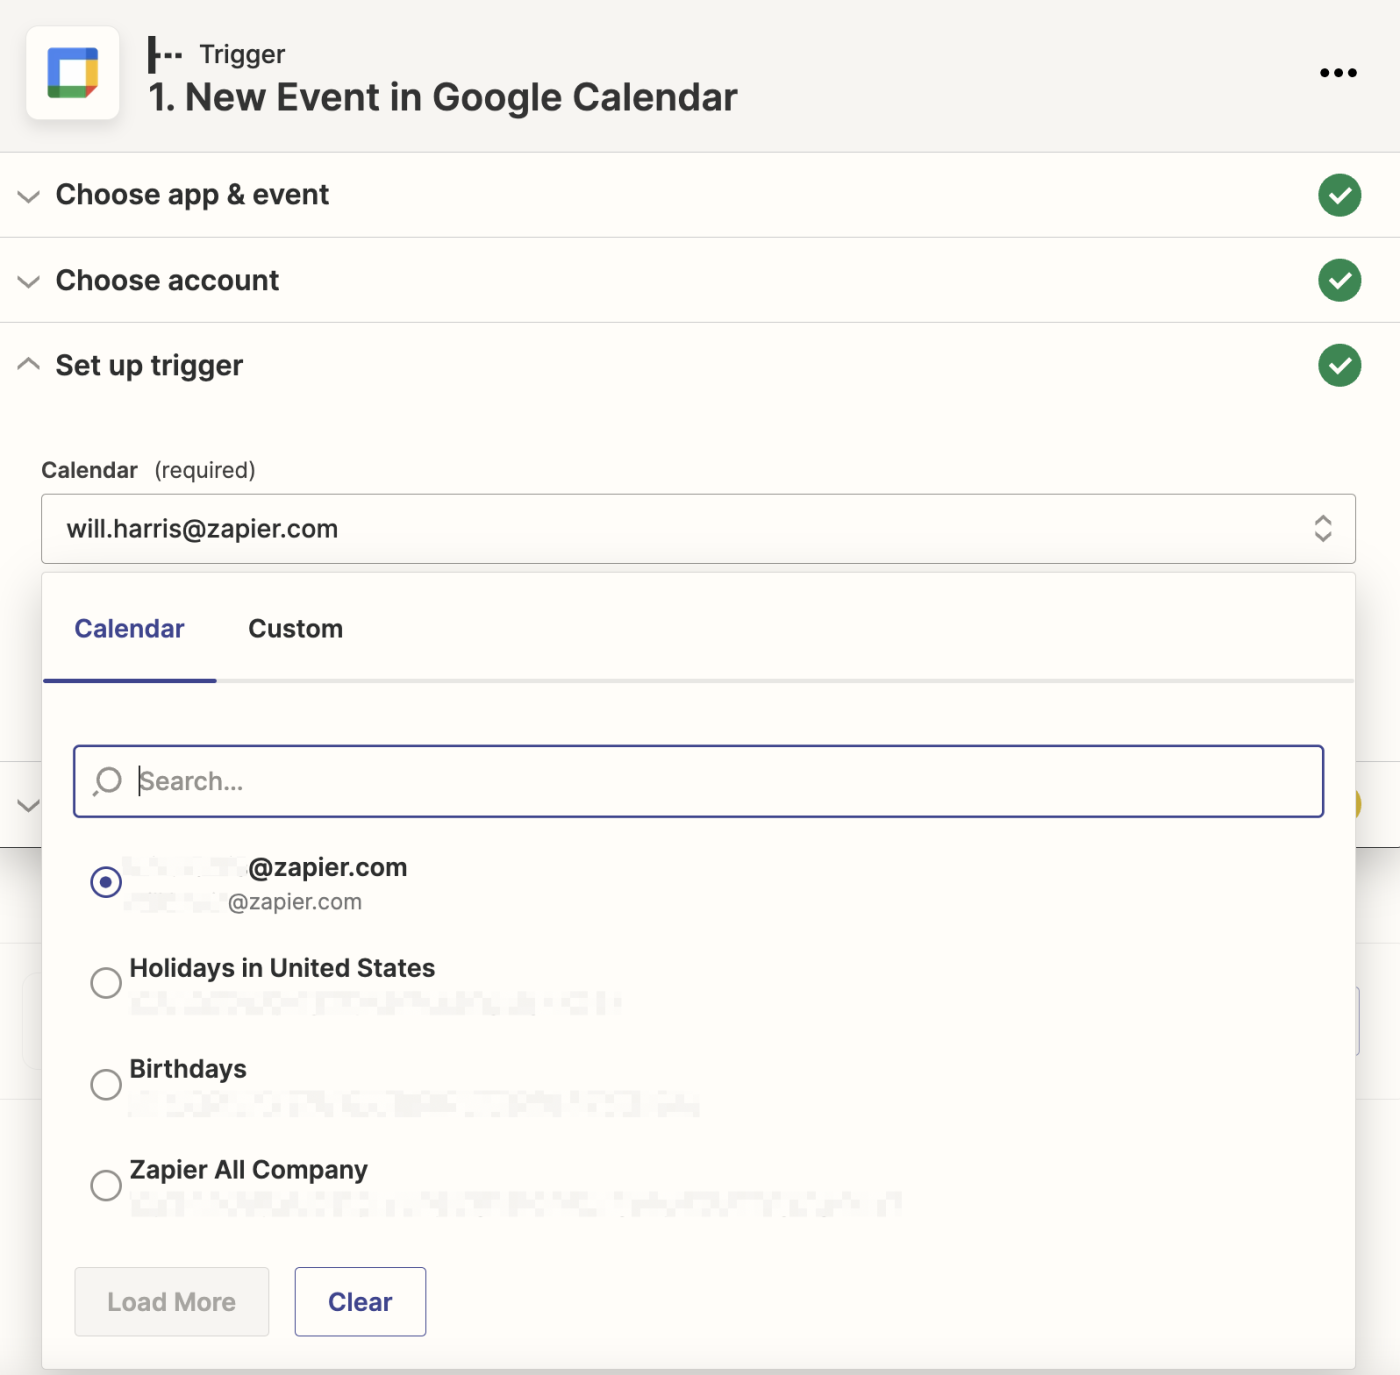 On the Calendar tab, a specific Google calendar is selected.